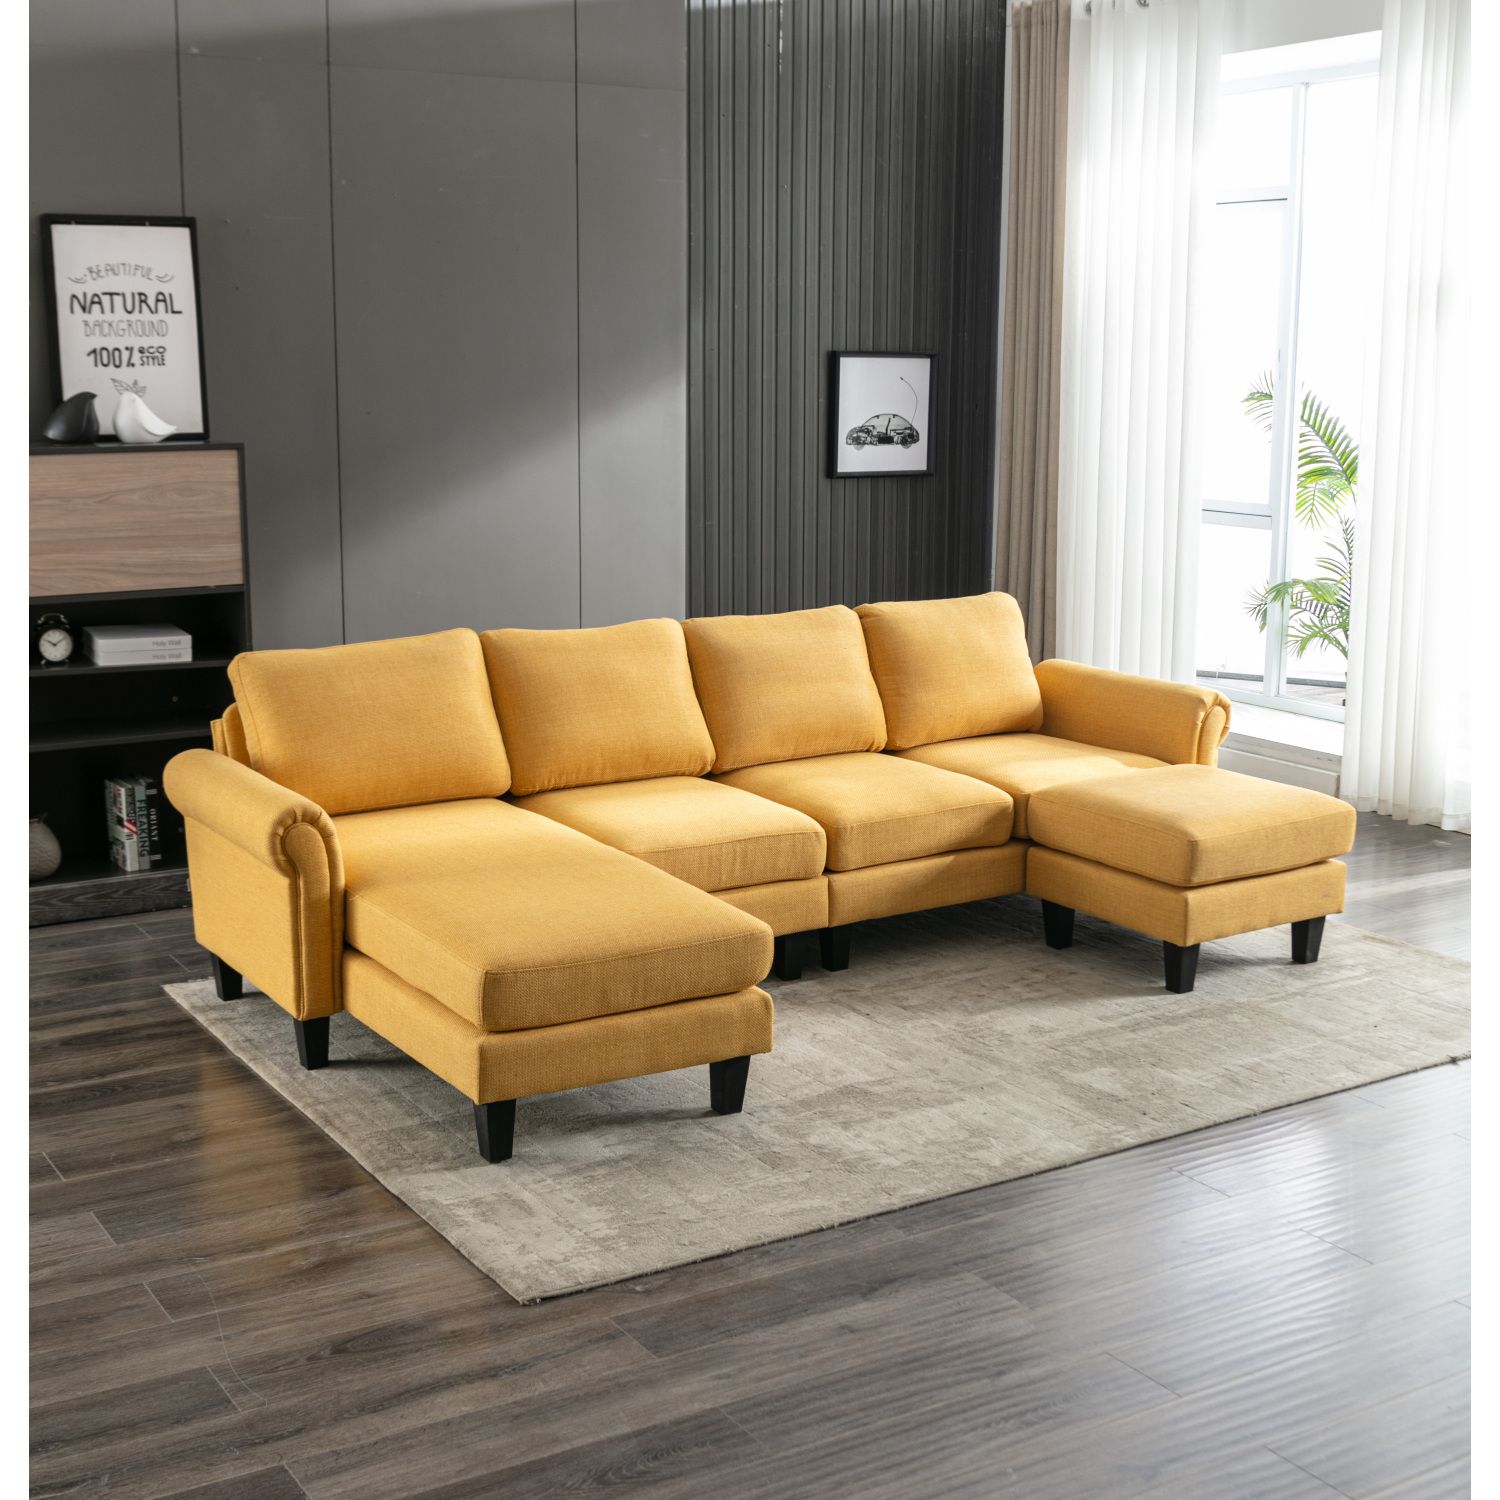 JASMODER 60.63-in Modern Yellow Polyester/Blend Sofa at Lowes.com